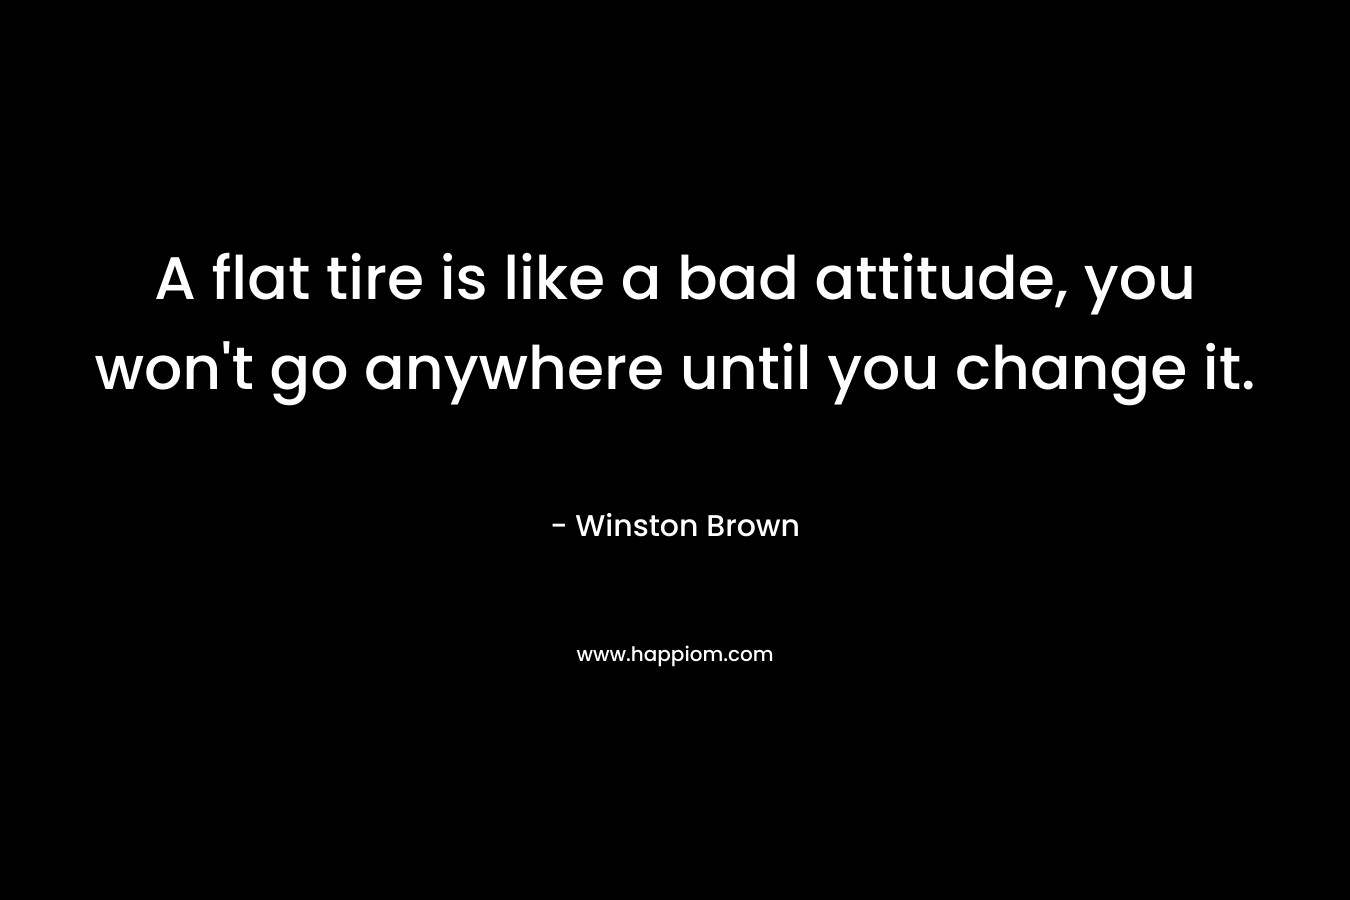 A flat tire is like a bad attitude, you won't go anywhere until you change it.